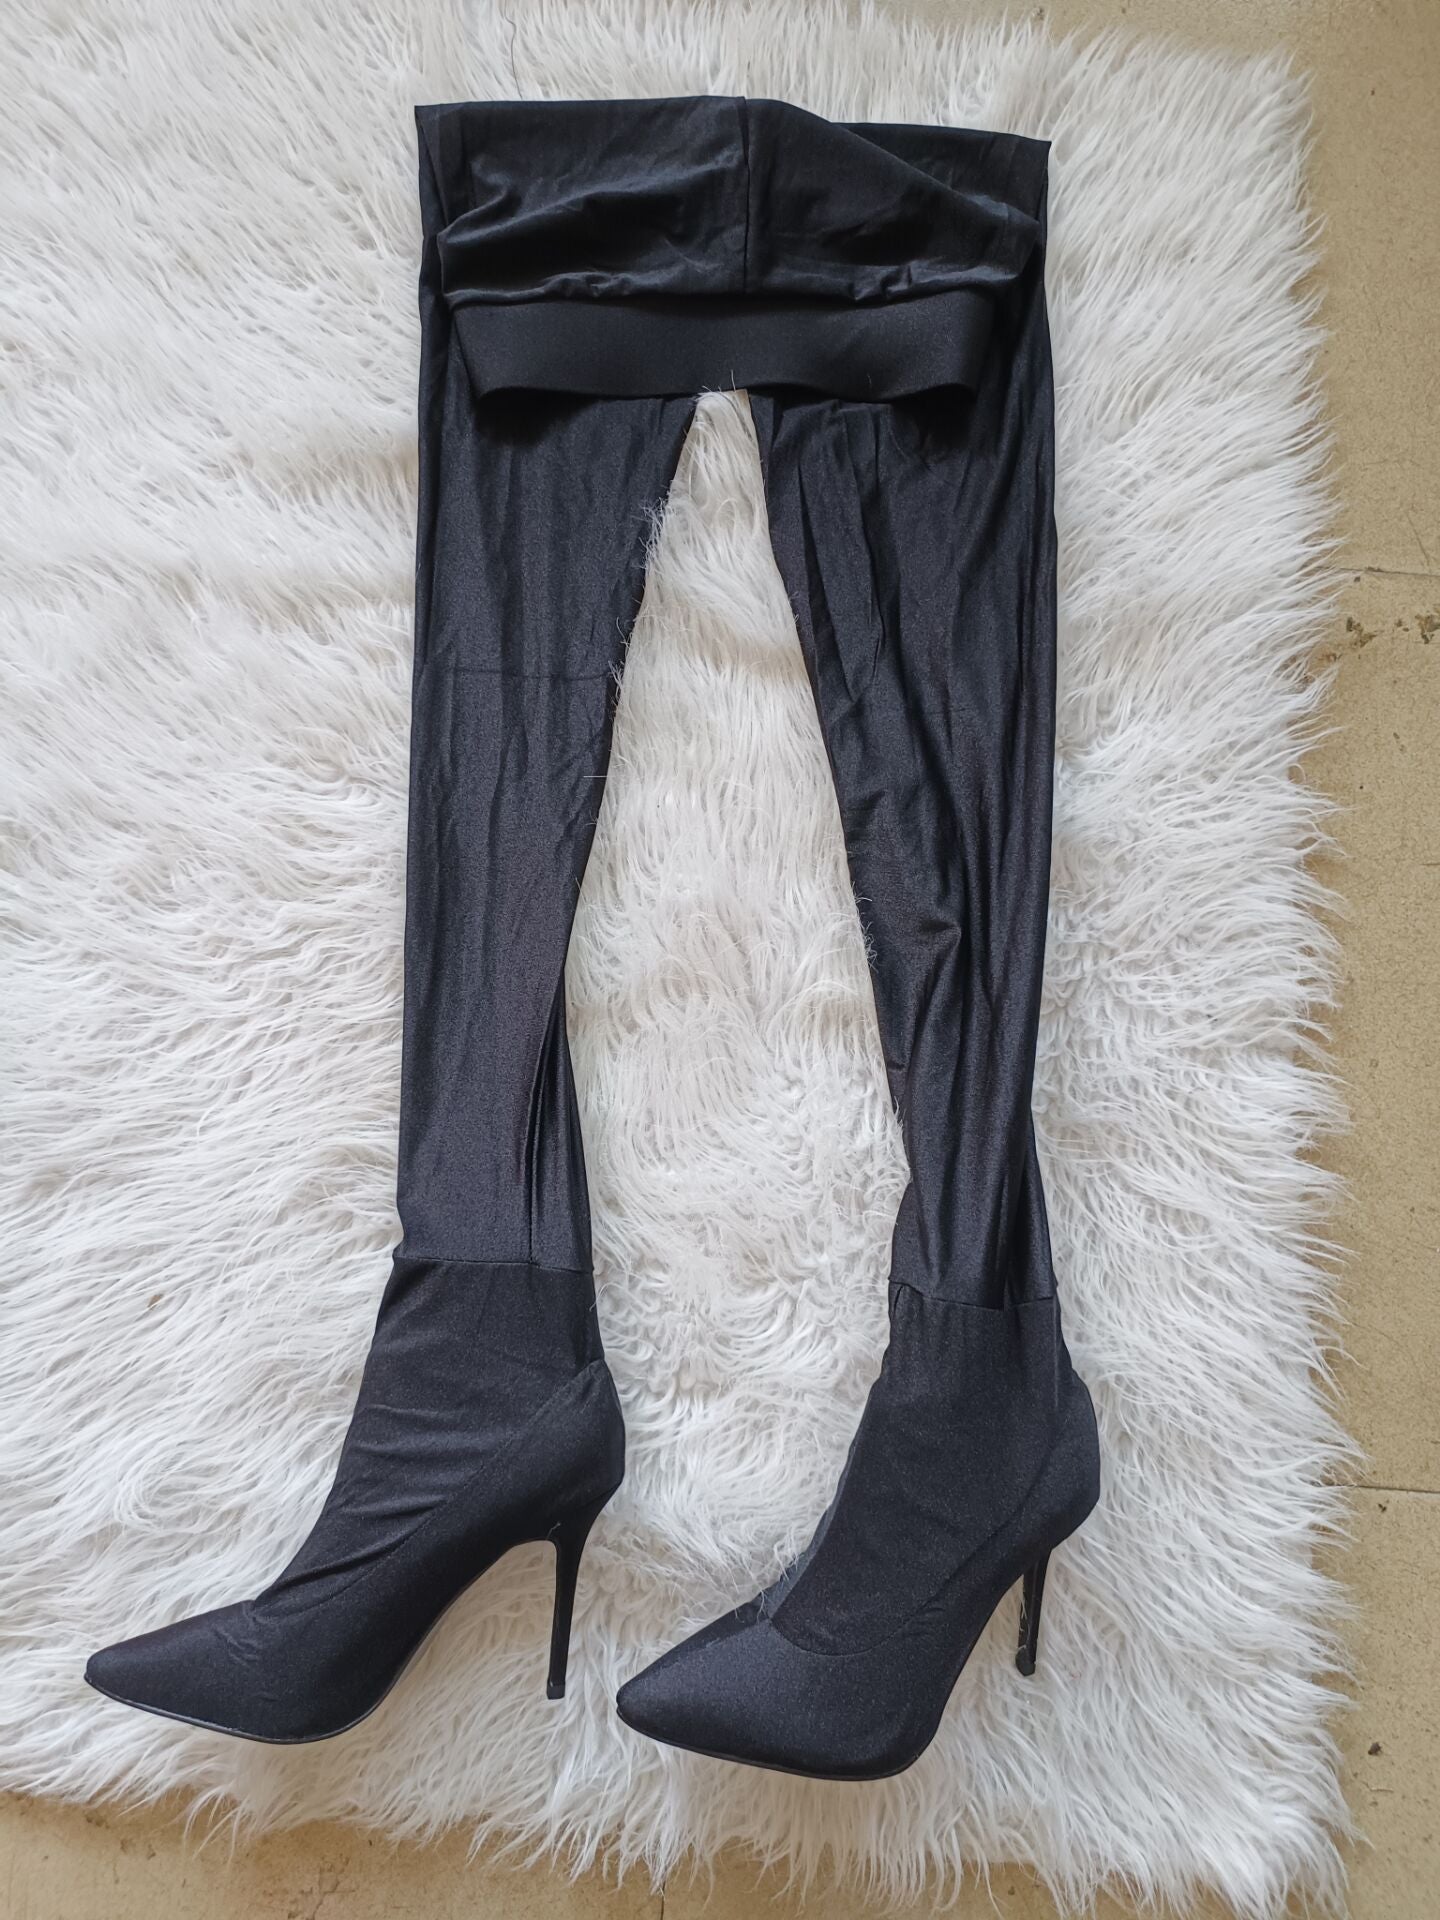 Pointed Toe Over The Knee Socks Boots